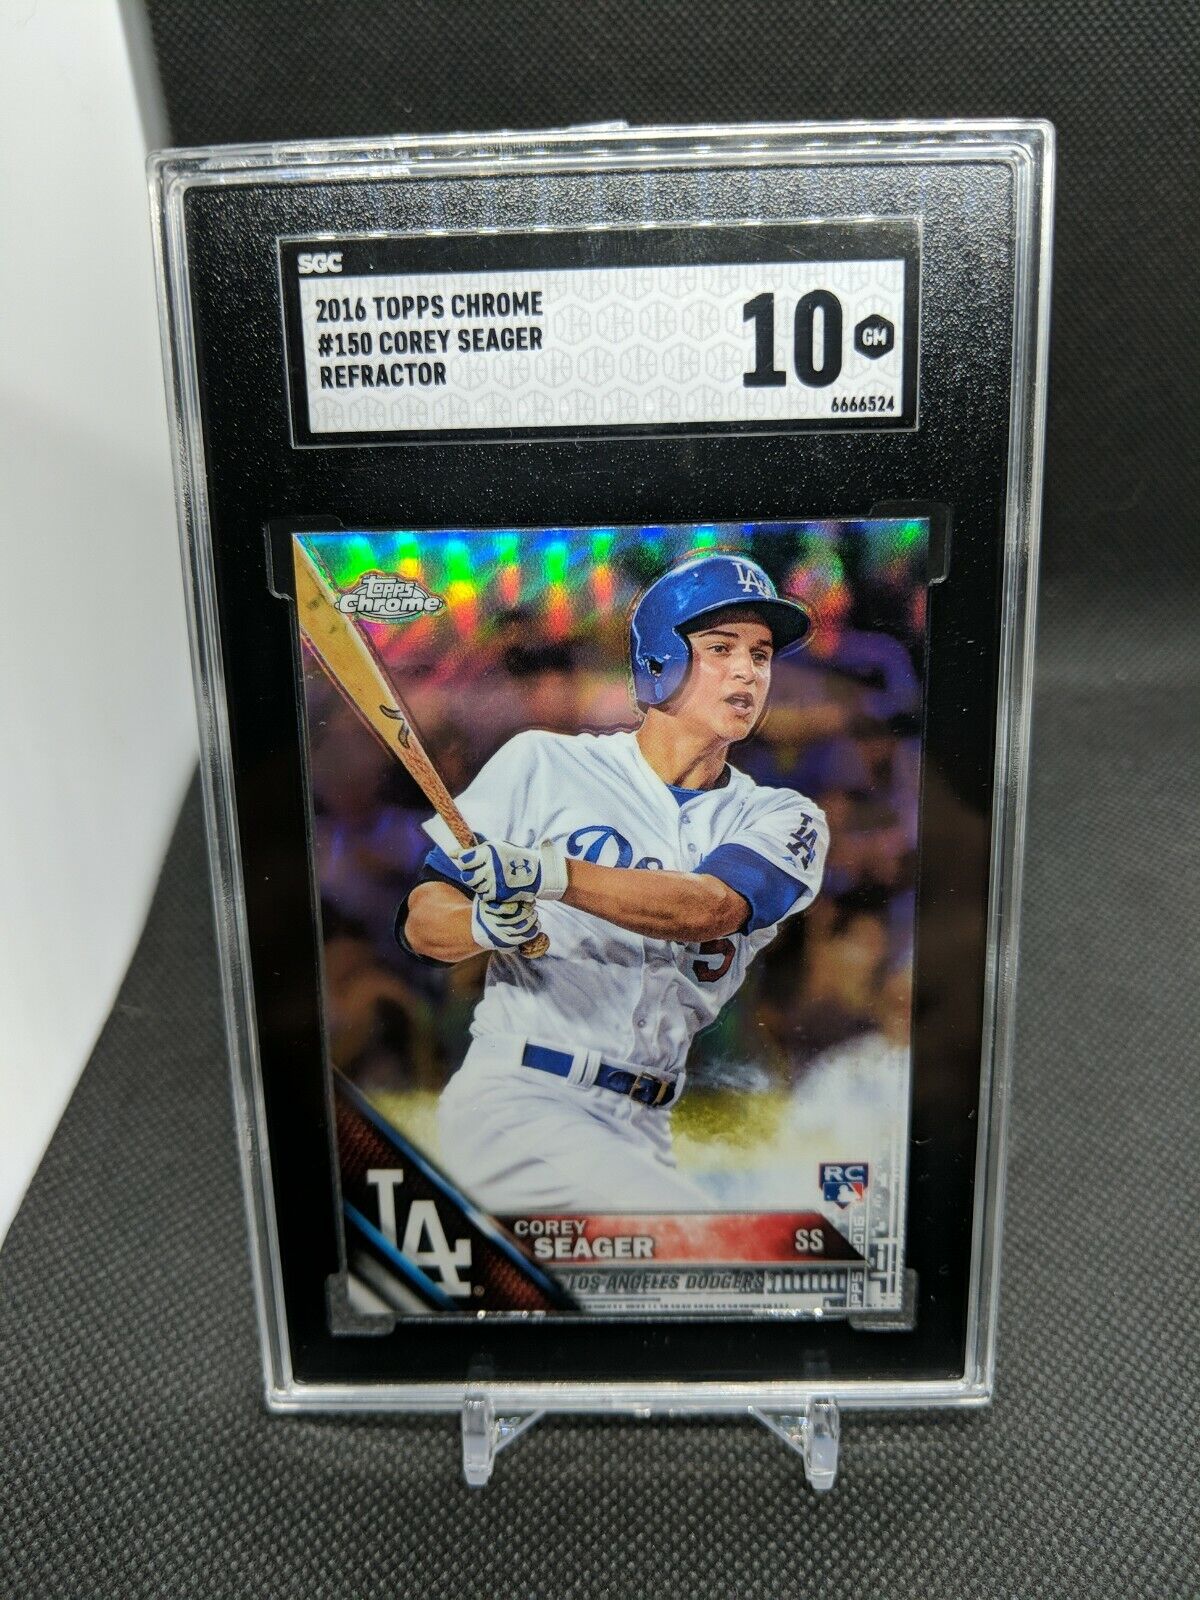 2016 Topps Chrome #150 Refractor Corey Seager Rookie SGC 10 Gem Mint Dodgers